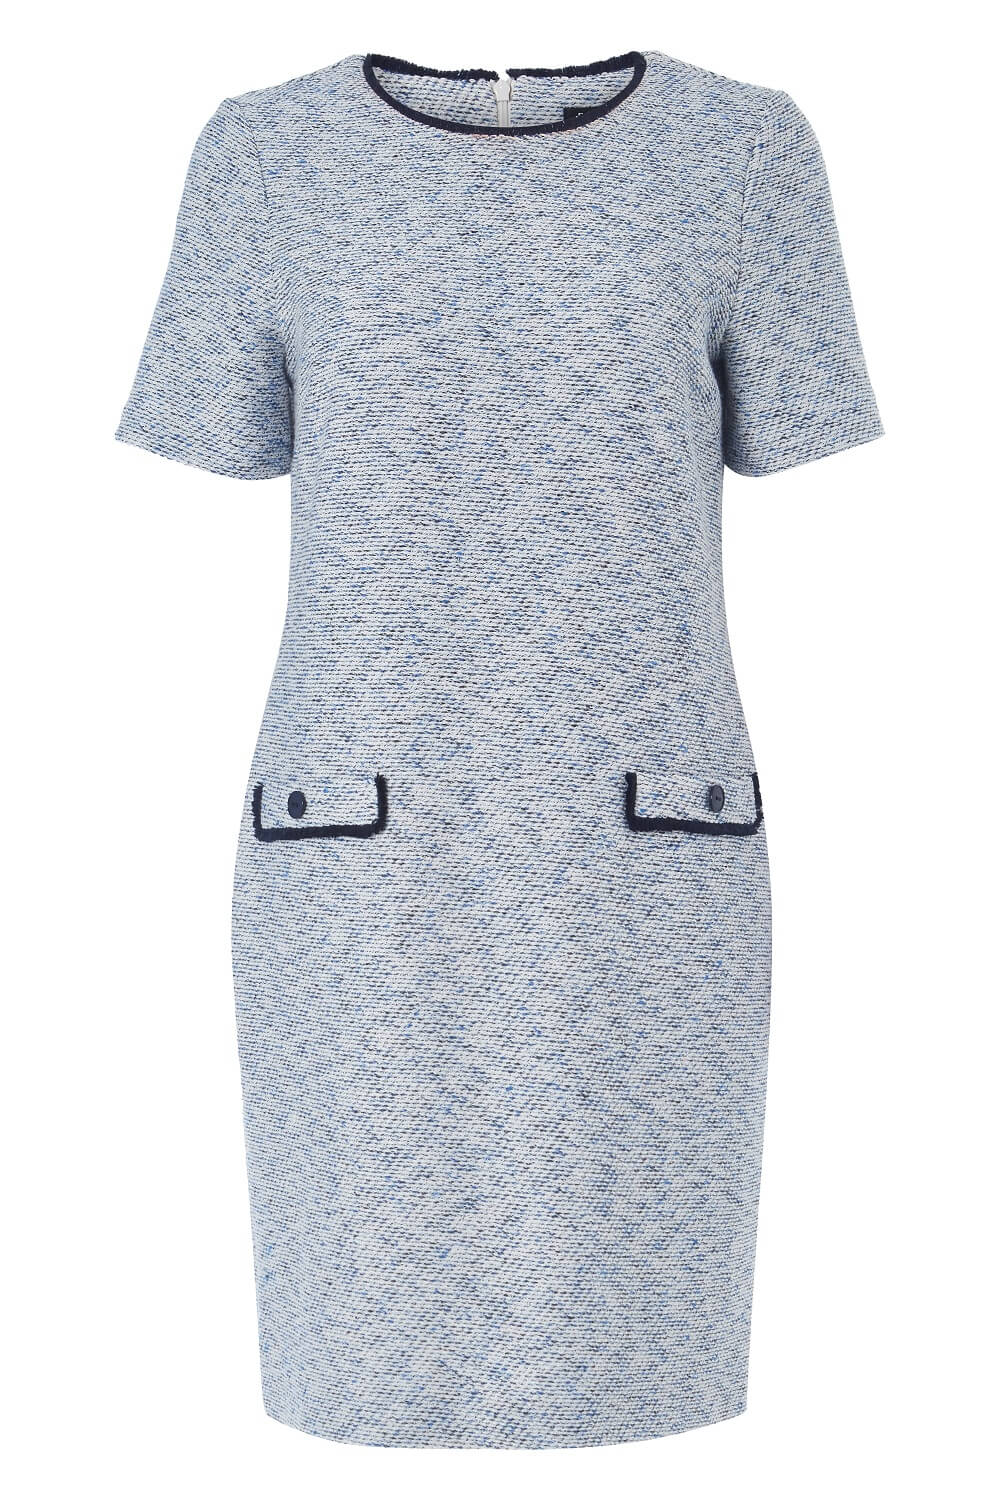 Blue Tweed Textured Shift Dress, Image 5 of 5